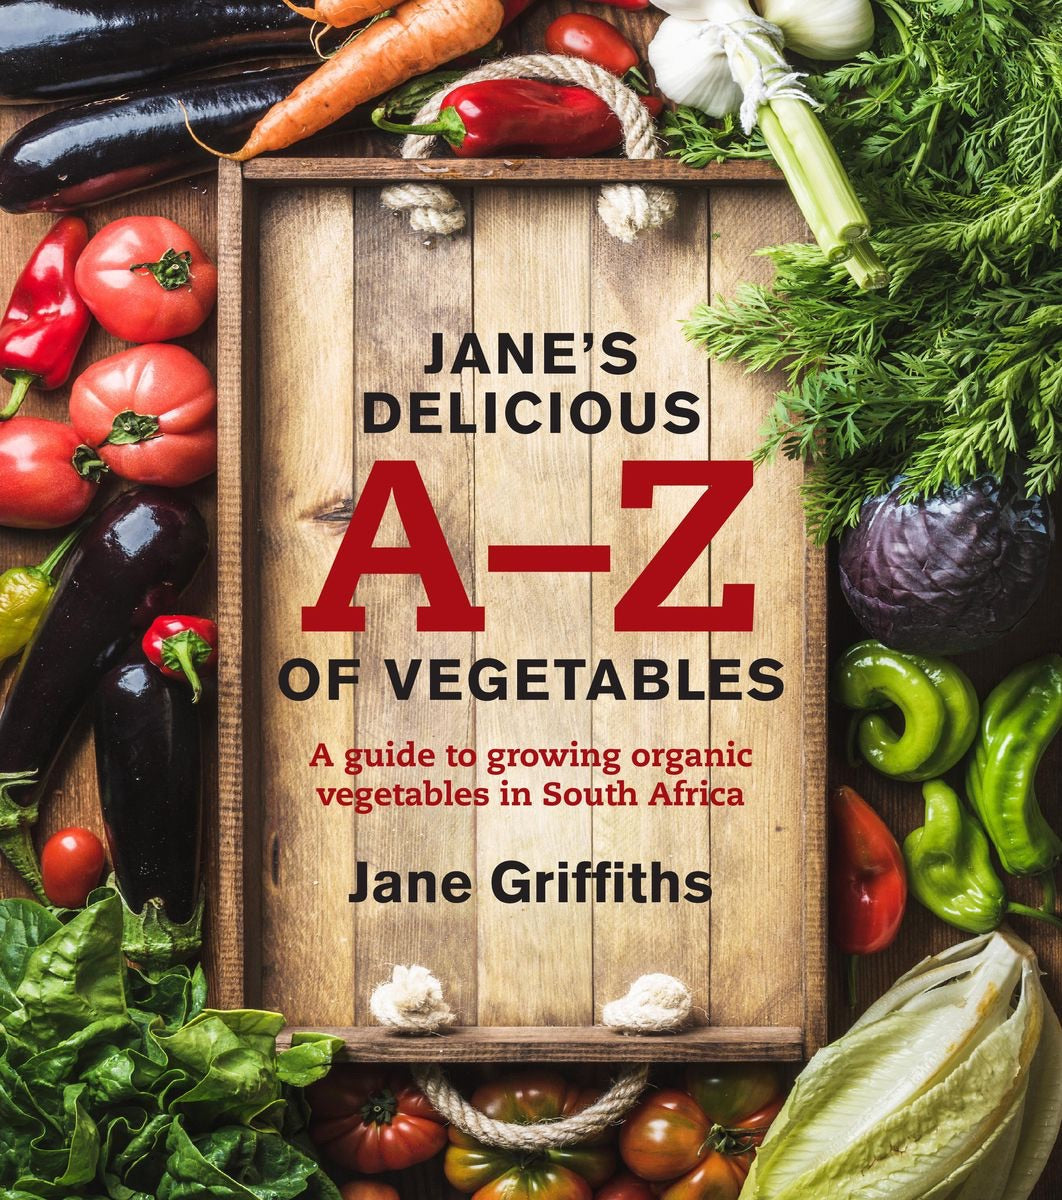 Jane's delicious A-Z of vegetables: A guide to growing organic vegetables in South Africa